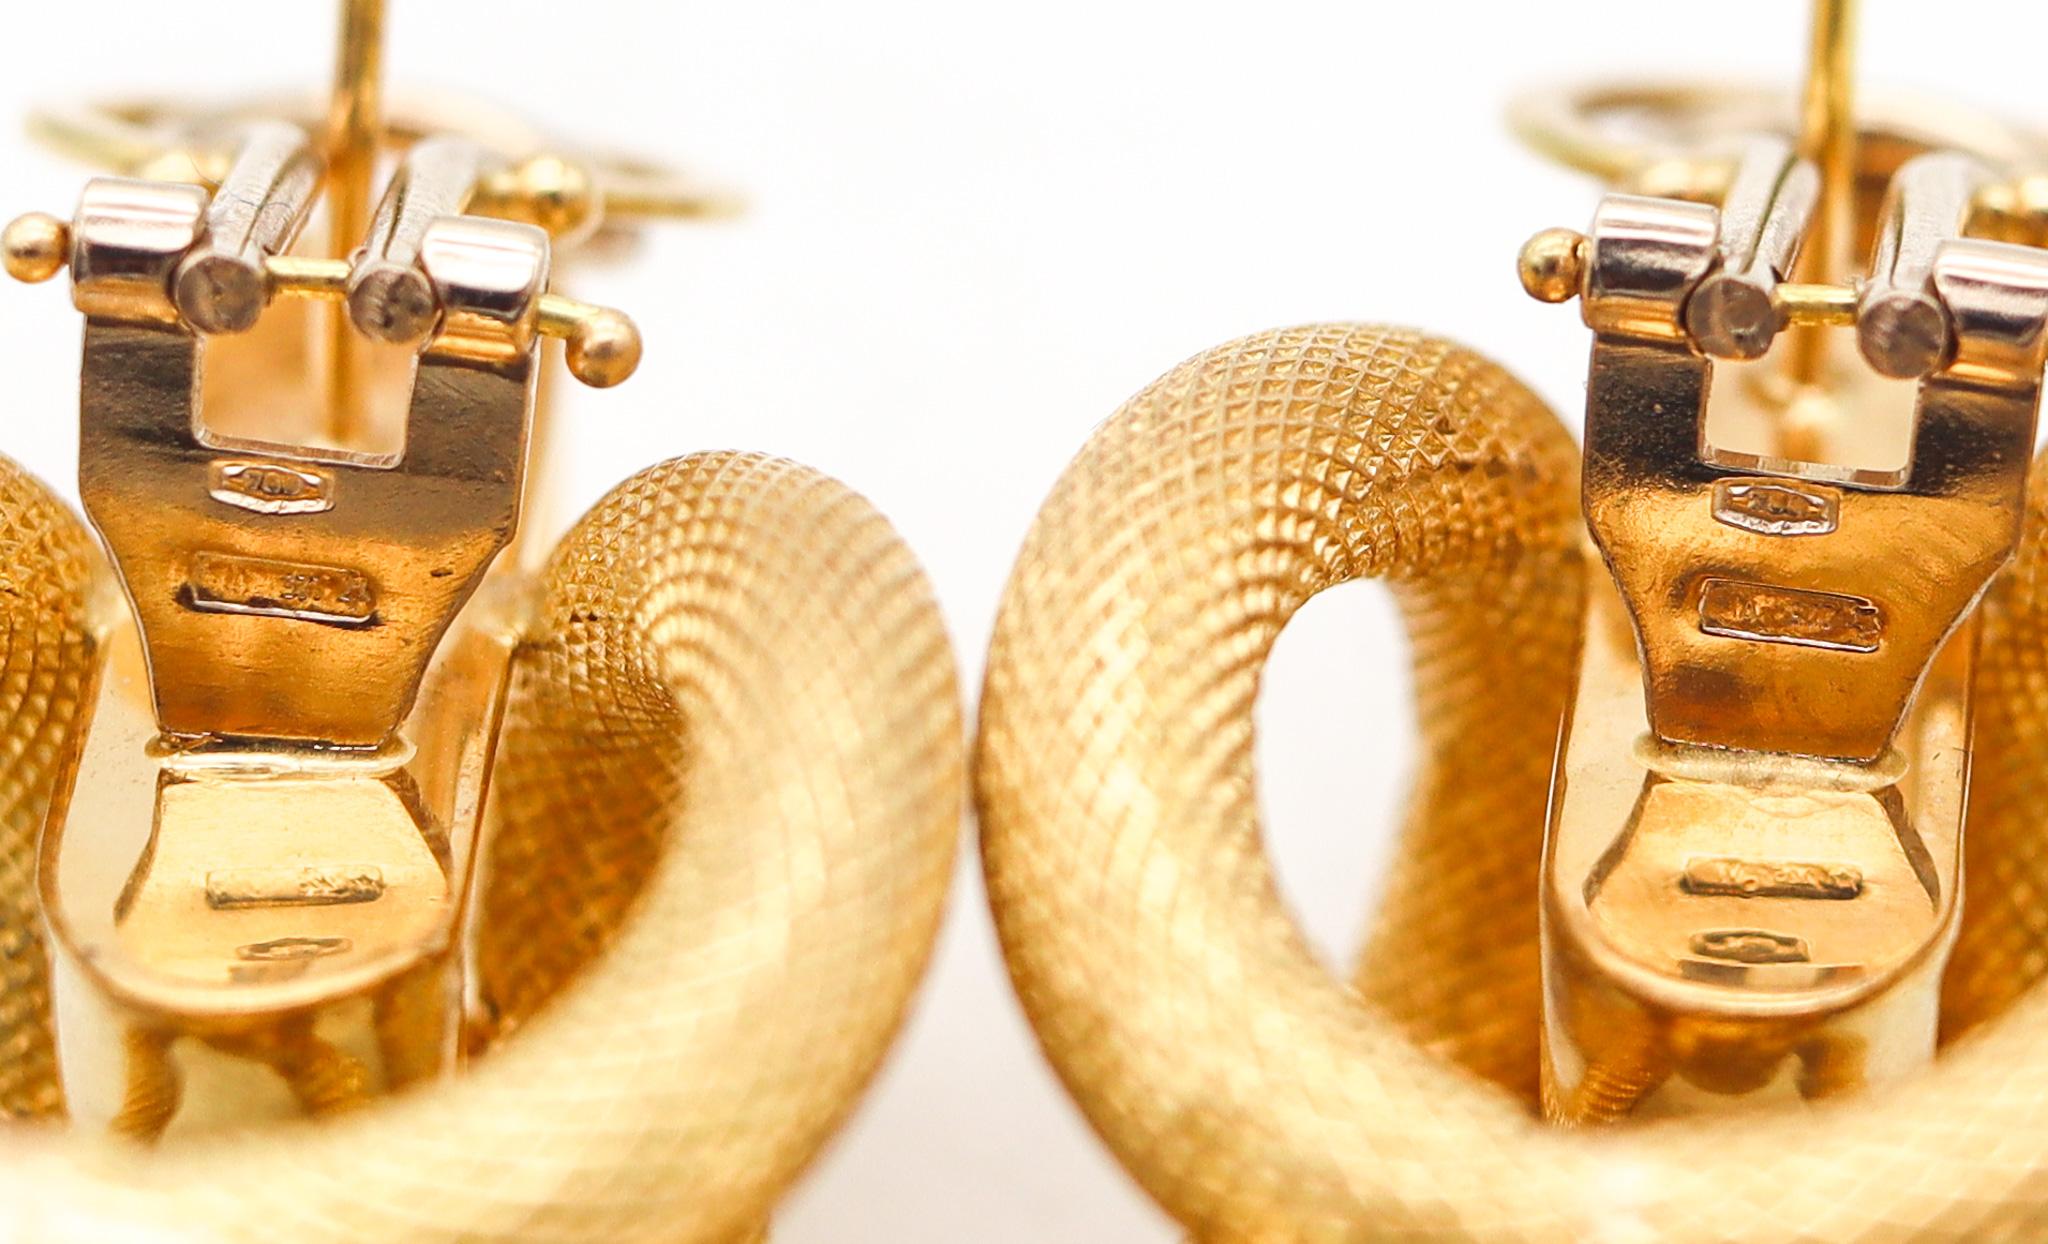 Riccardo Marotto Sculptural Tubular Earrings In Textured 18Kt Yellow Gold In Excellent Condition For Sale In Miami, FL